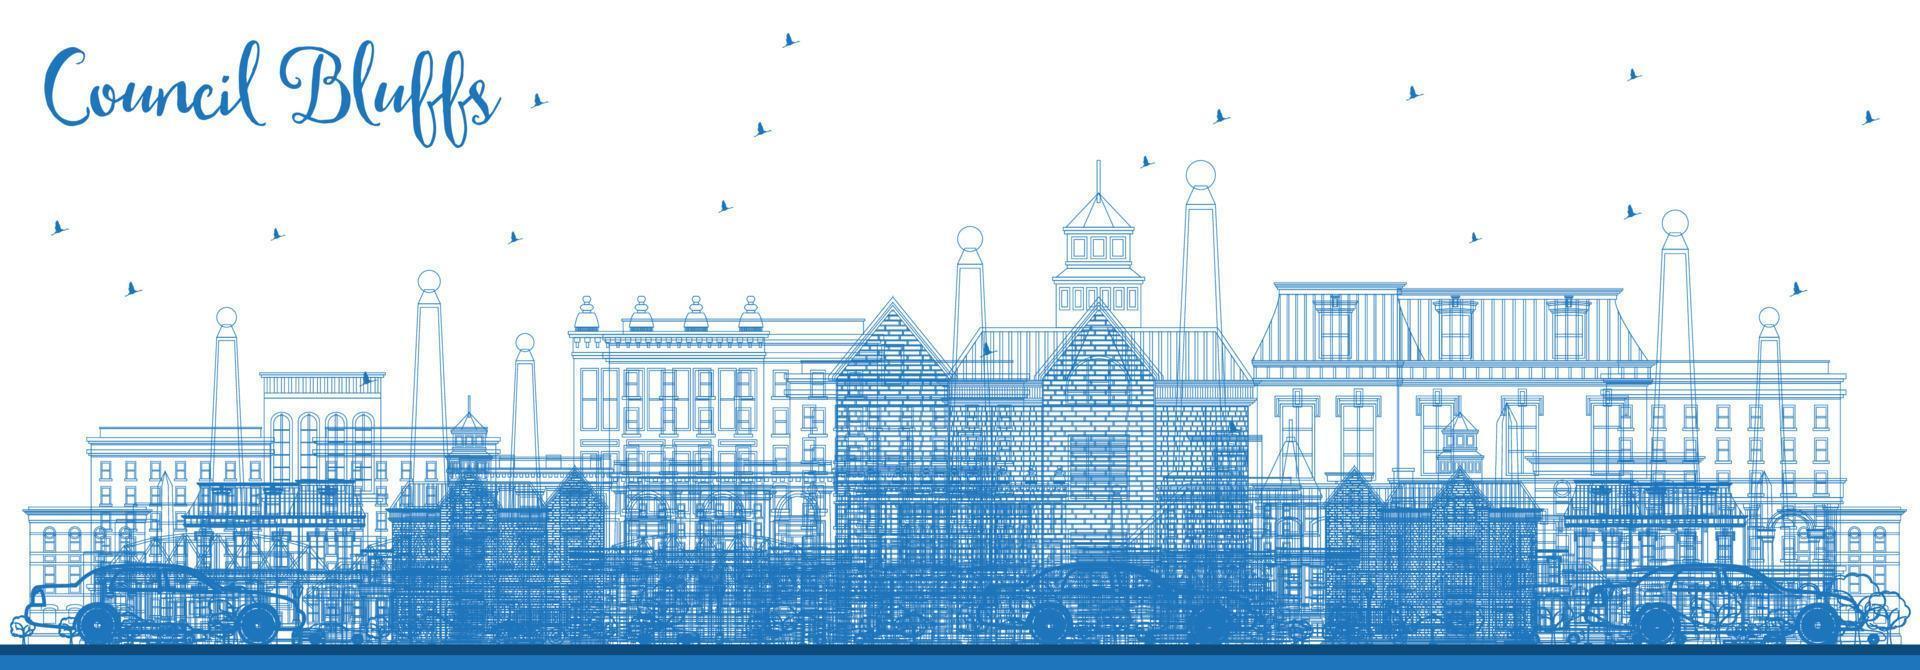 Outline Council Bluffs Iowa Skyline with Blue Buildings. vector